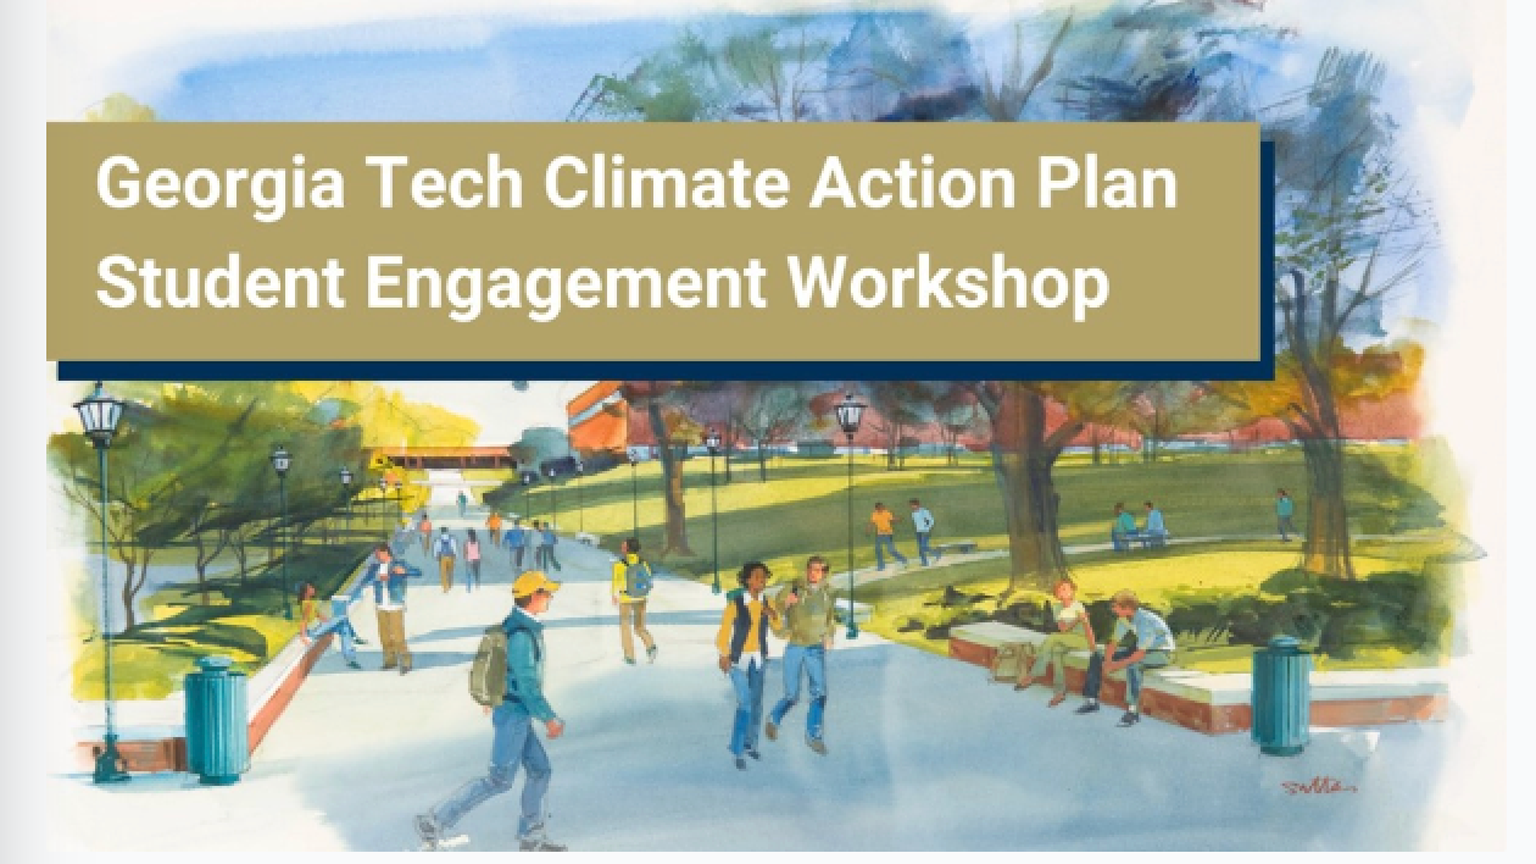 Stylized image showing pedestrians on a sidewalk, with a title that reads, "Georgia Tech Climate Action Plan Student Engagement Workshop."